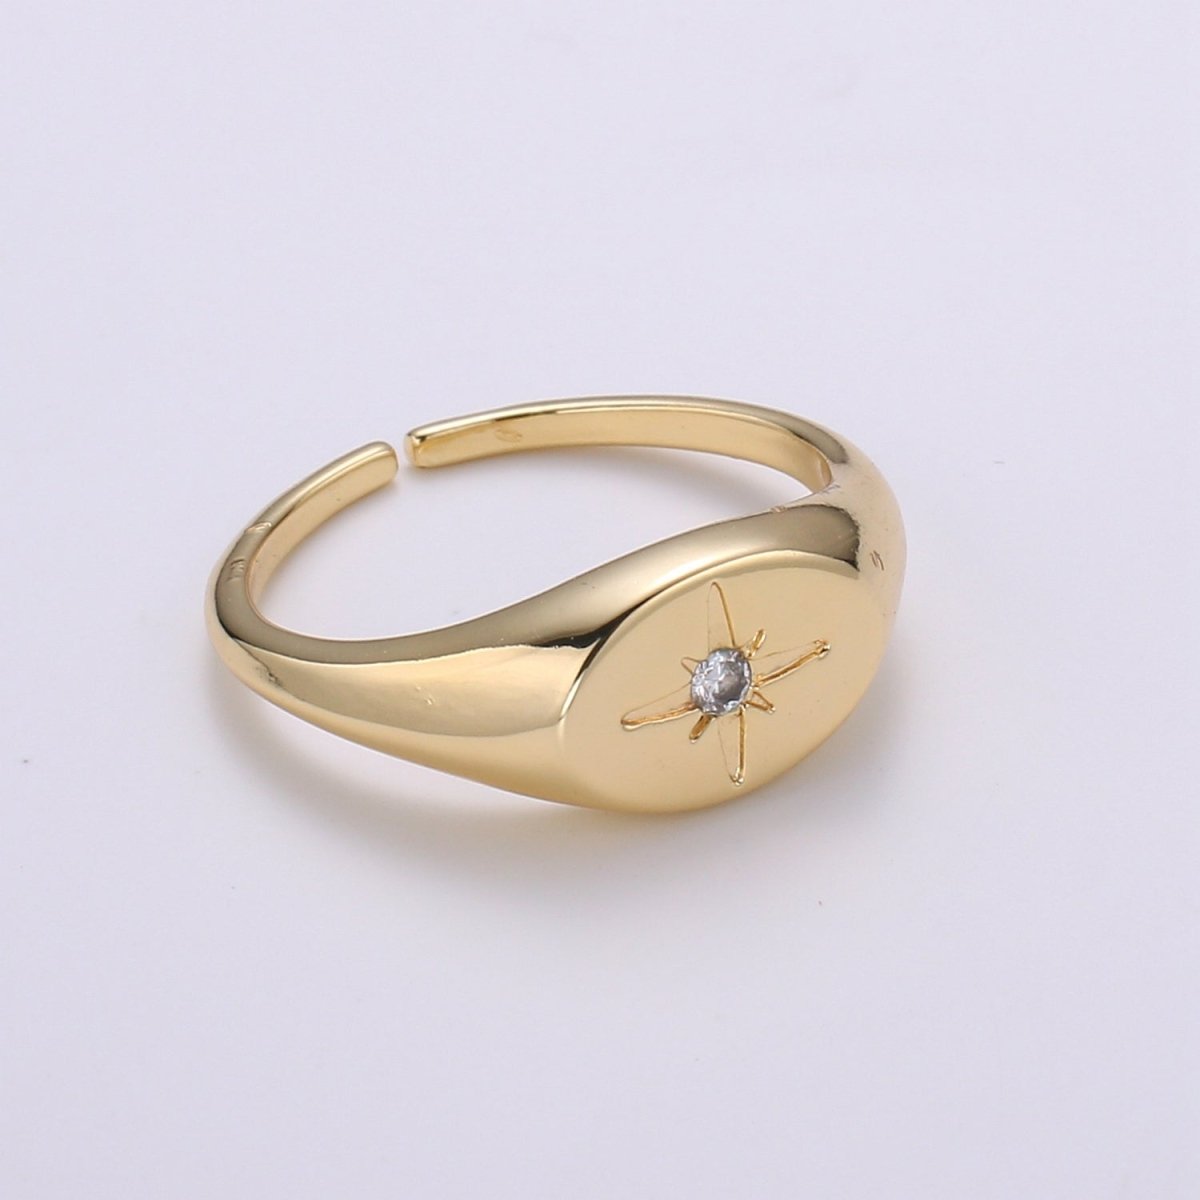 North Star of the Universe Gold Ring, Solitaire CZ Milky way Adjustable Gold Signet Ring, Simple Ring, Circle Ring R-494 S-108 - DLUXCA